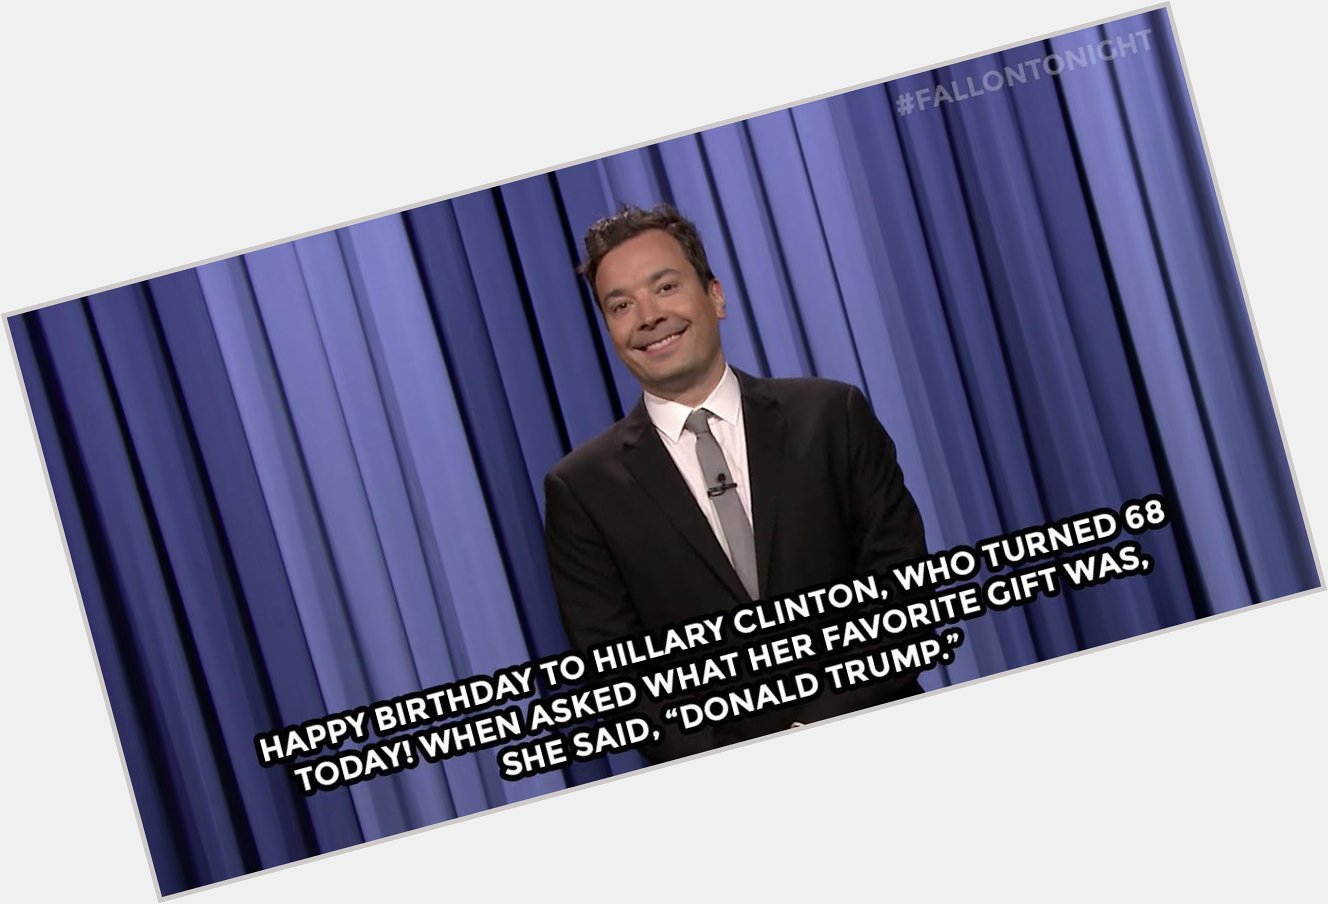 \"Happy birthday to Hillary Clinton, who turned 68 today! When asked what her favorite...\"  